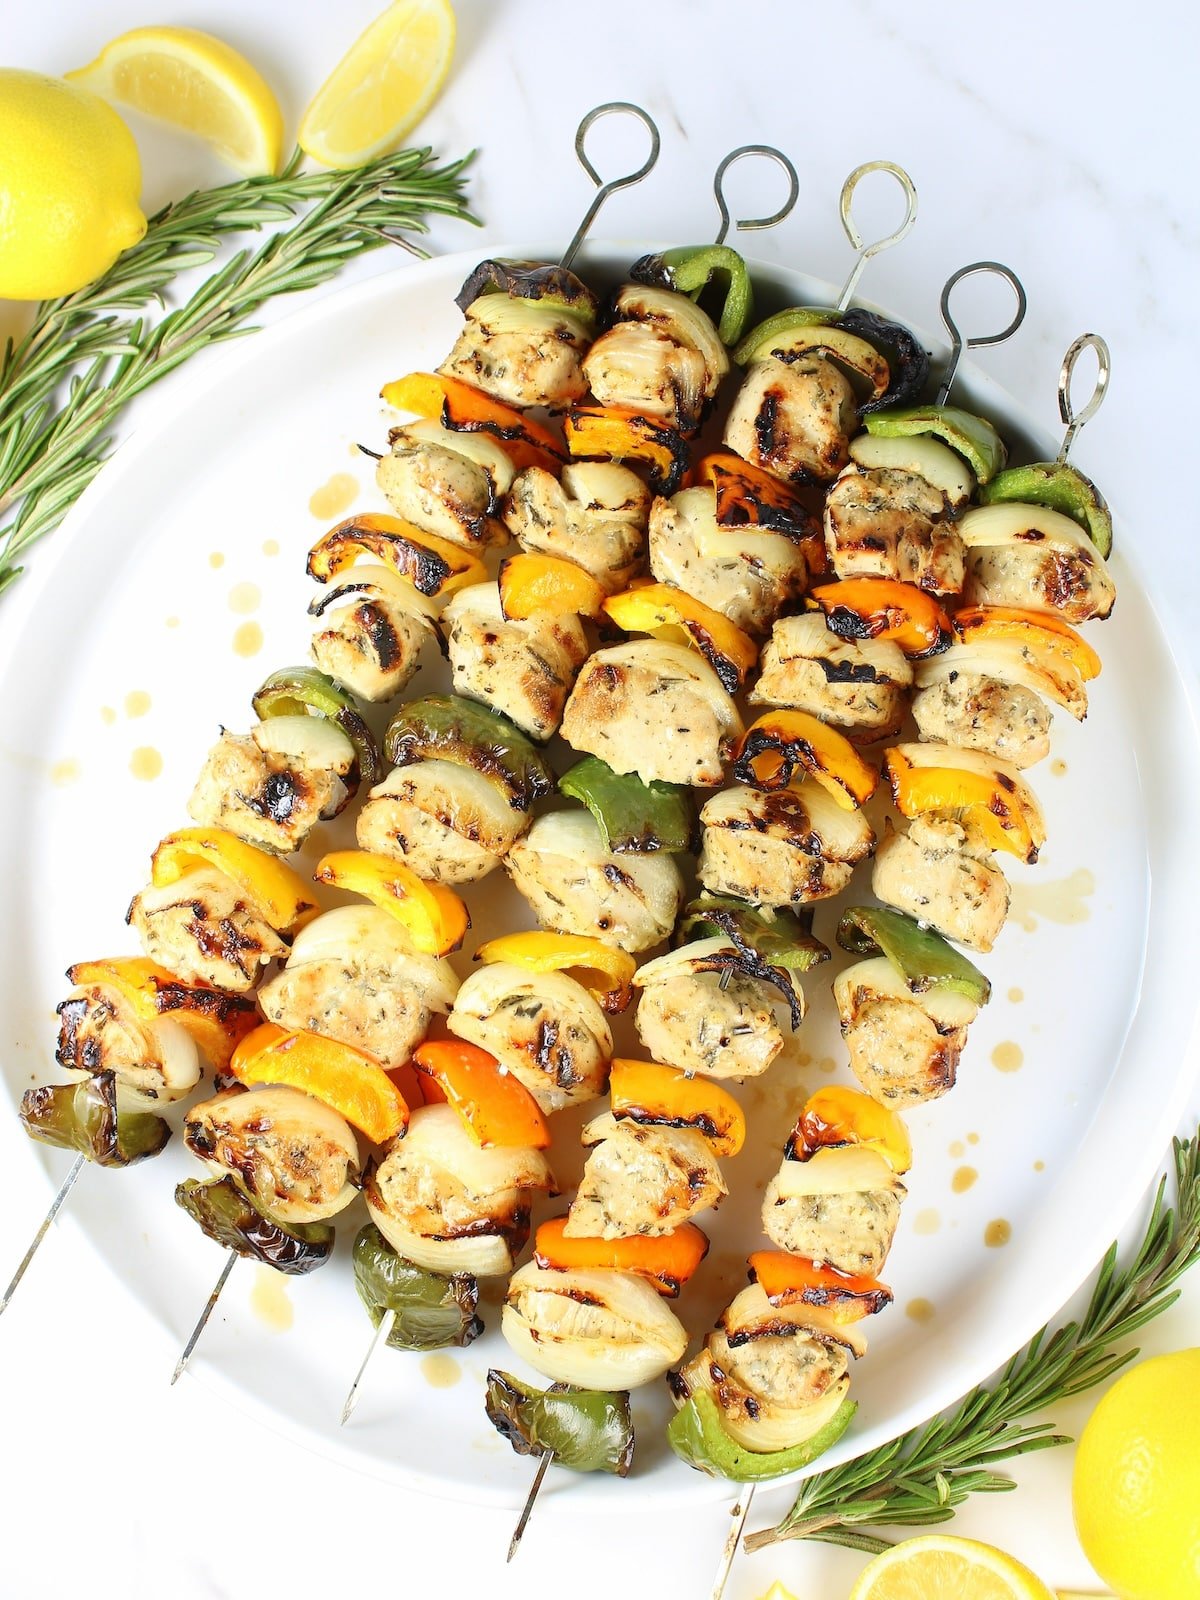 Grilled Rosemary Lemon Chicken Kabobs - a great summer grilling recipe.